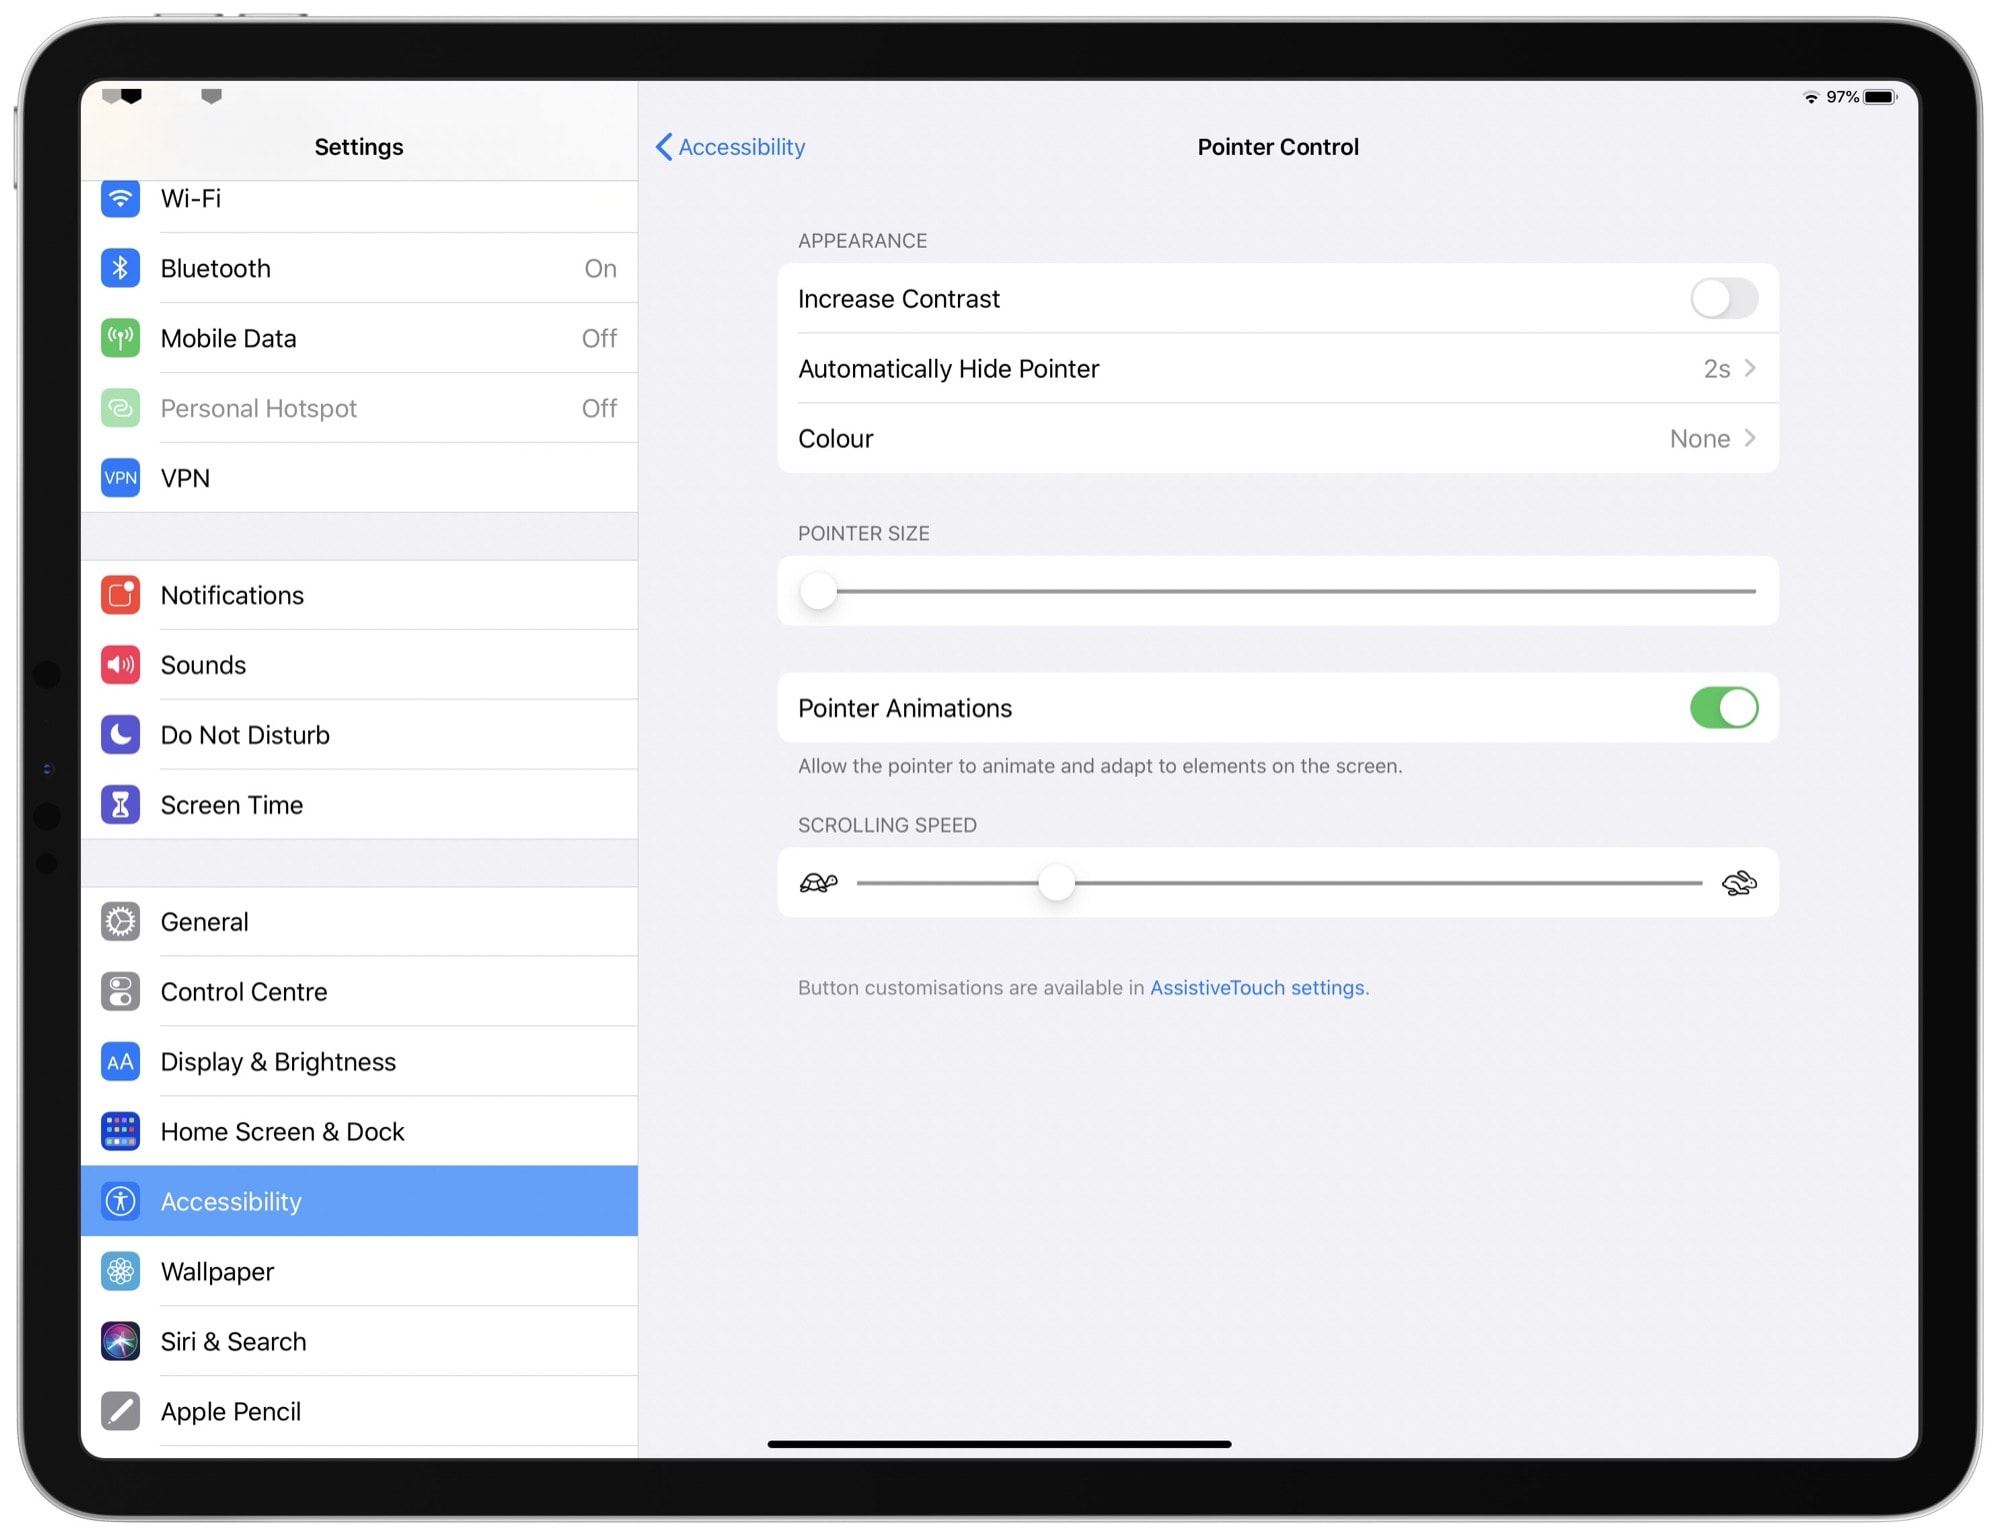 iPadOS 13.4's new Pointer Control settings.